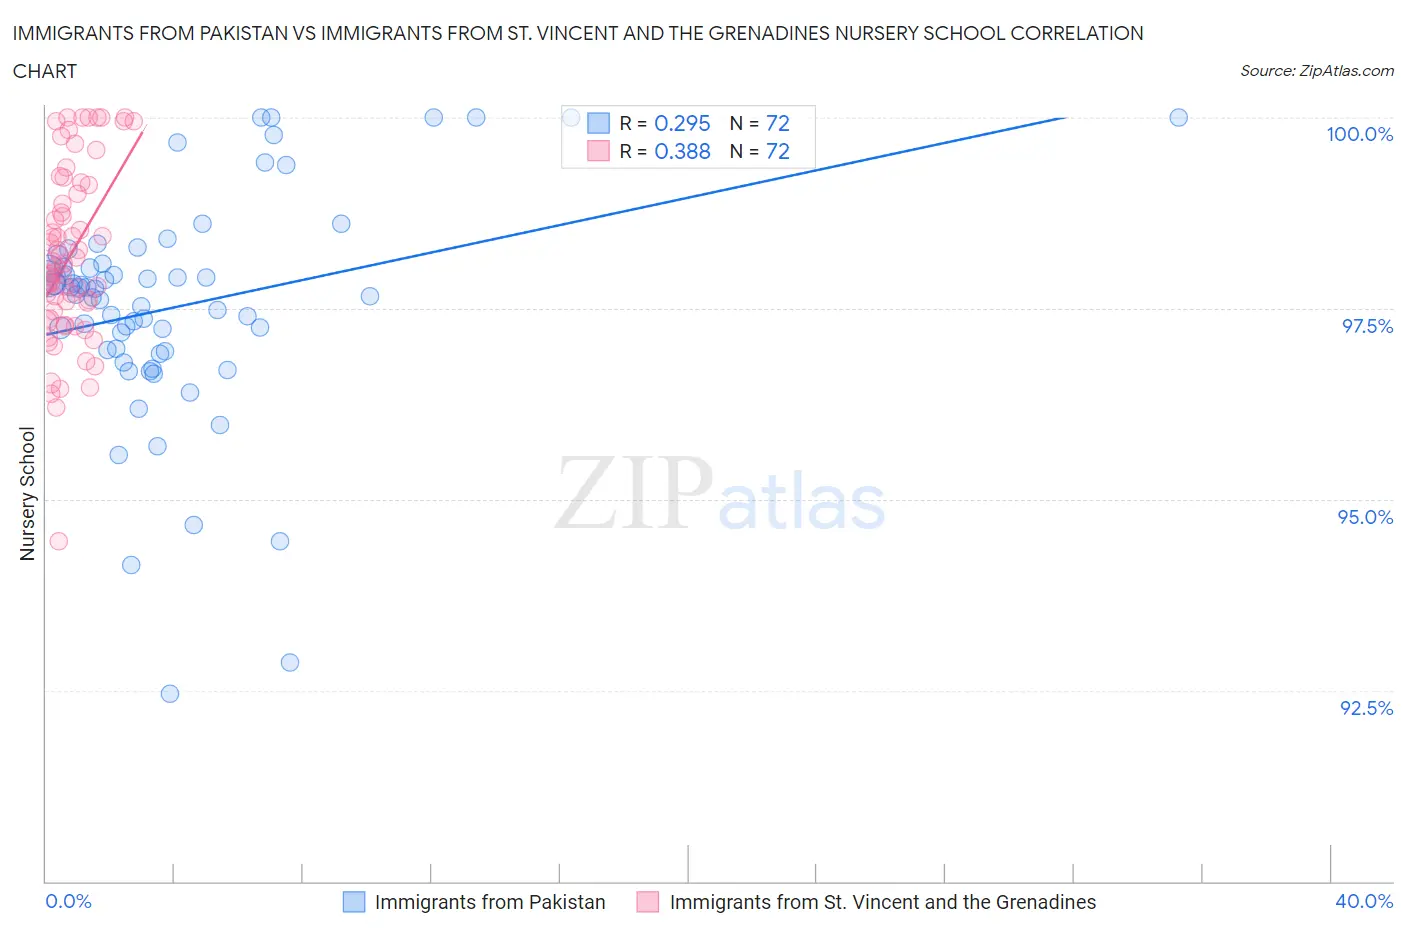 Immigrants from Pakistan vs Immigrants from St. Vincent and the Grenadines Nursery School